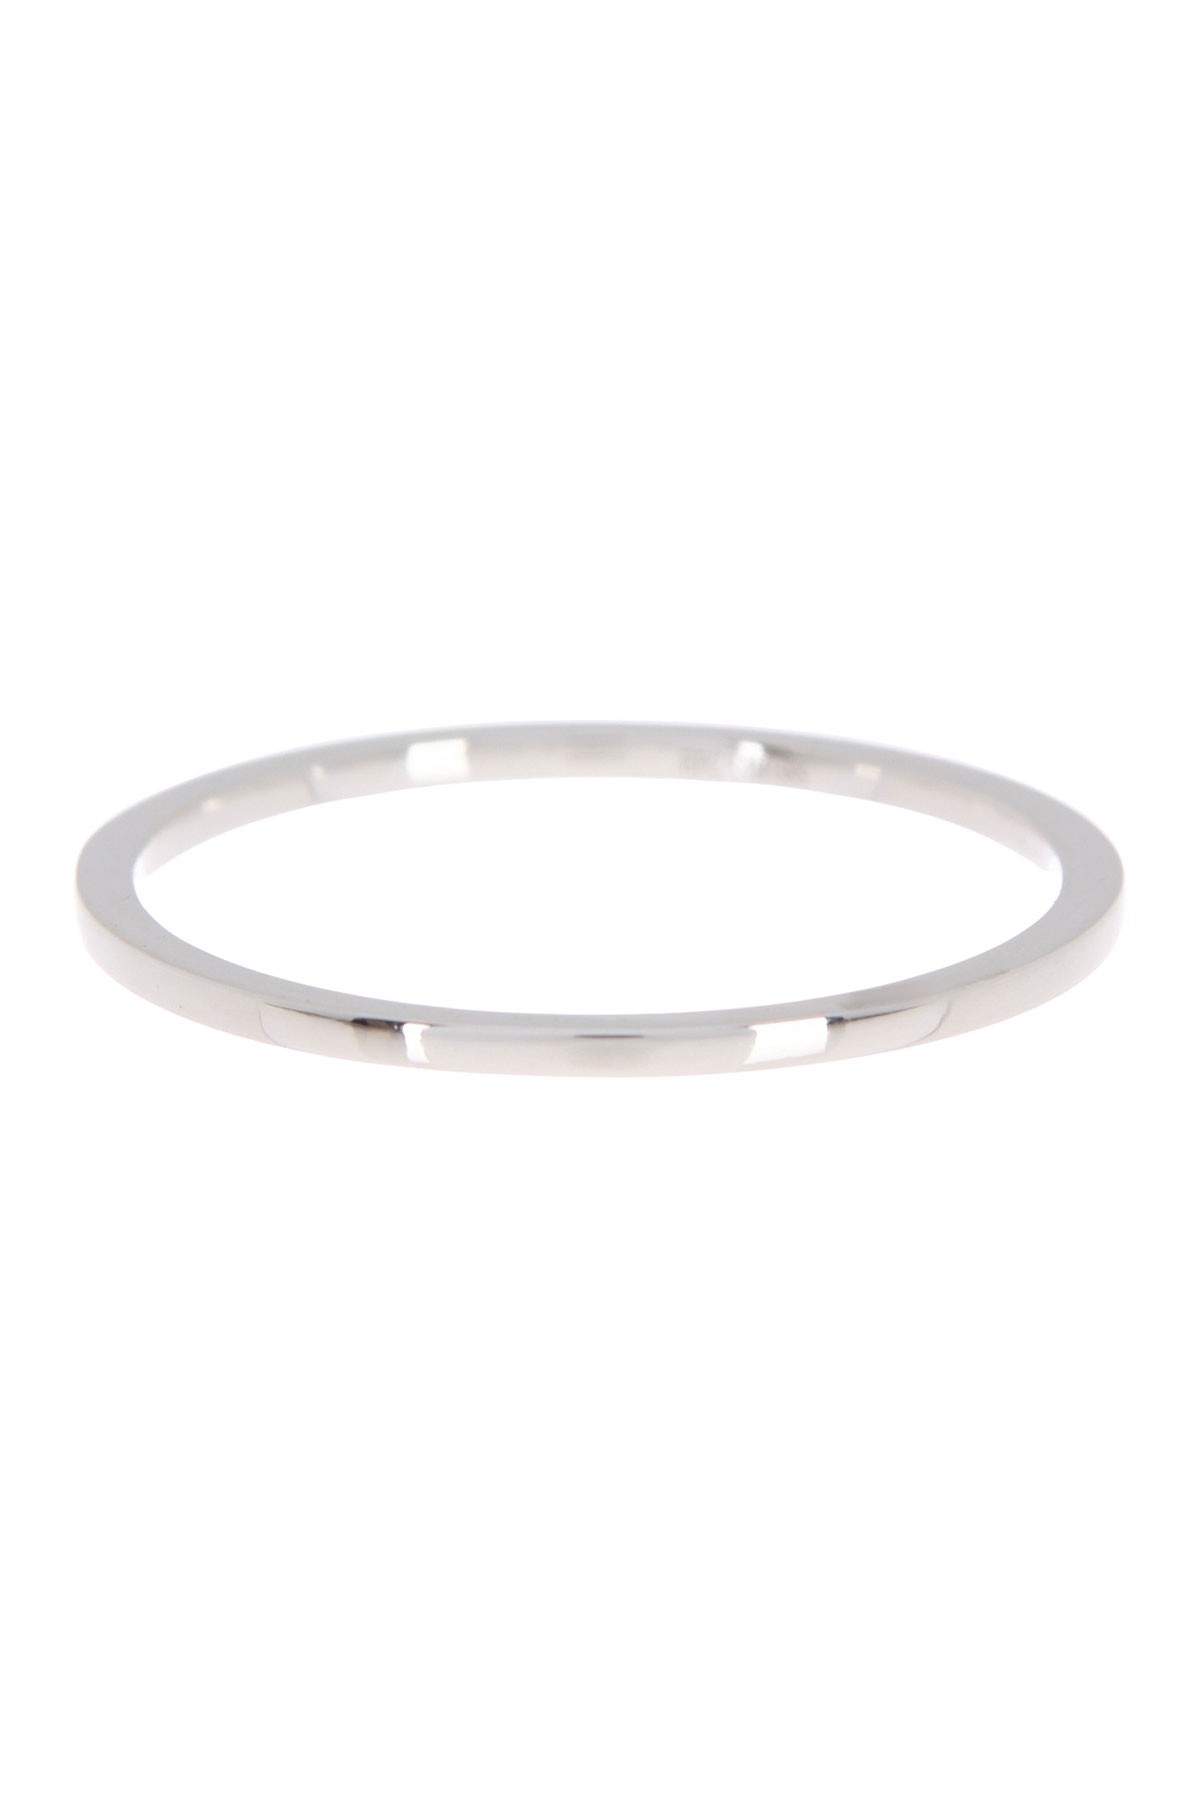 White Gold Thin Band Ring - Size 5 EF Collection